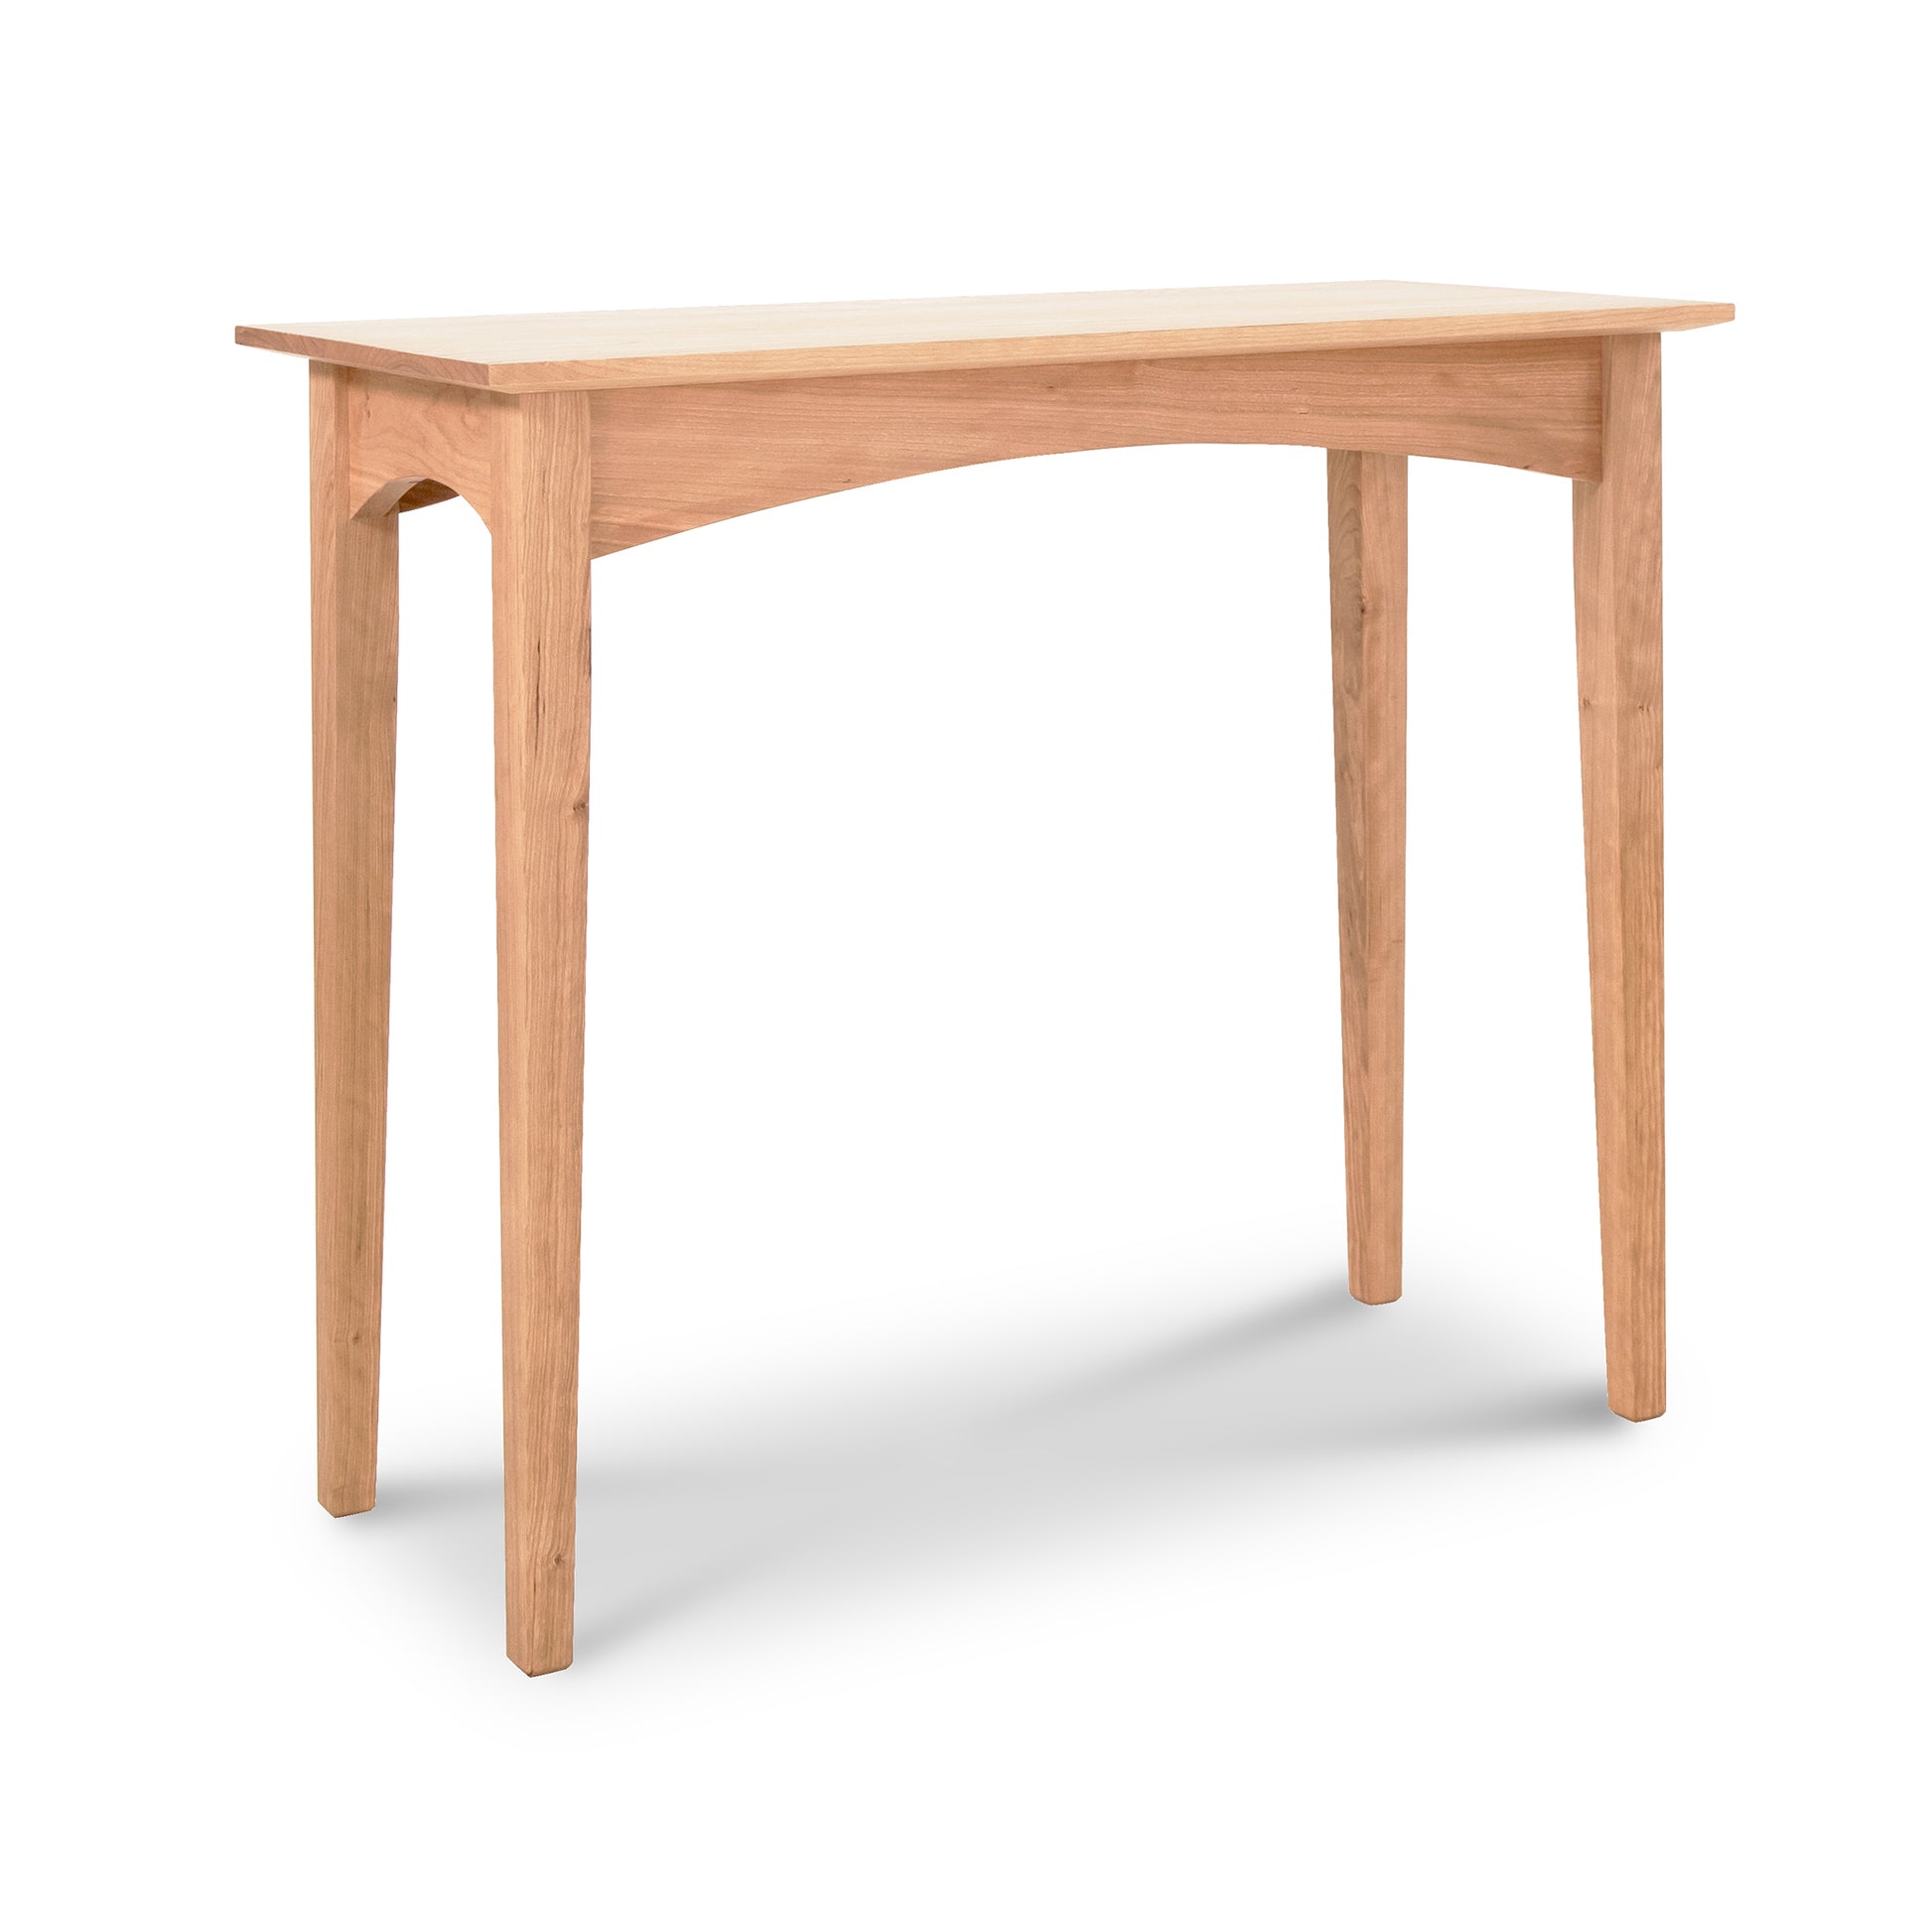 An eco-friendly American Shaker Sofa Table with four legs, isolated on a white background, crafted by Maple Corner Woodworks.